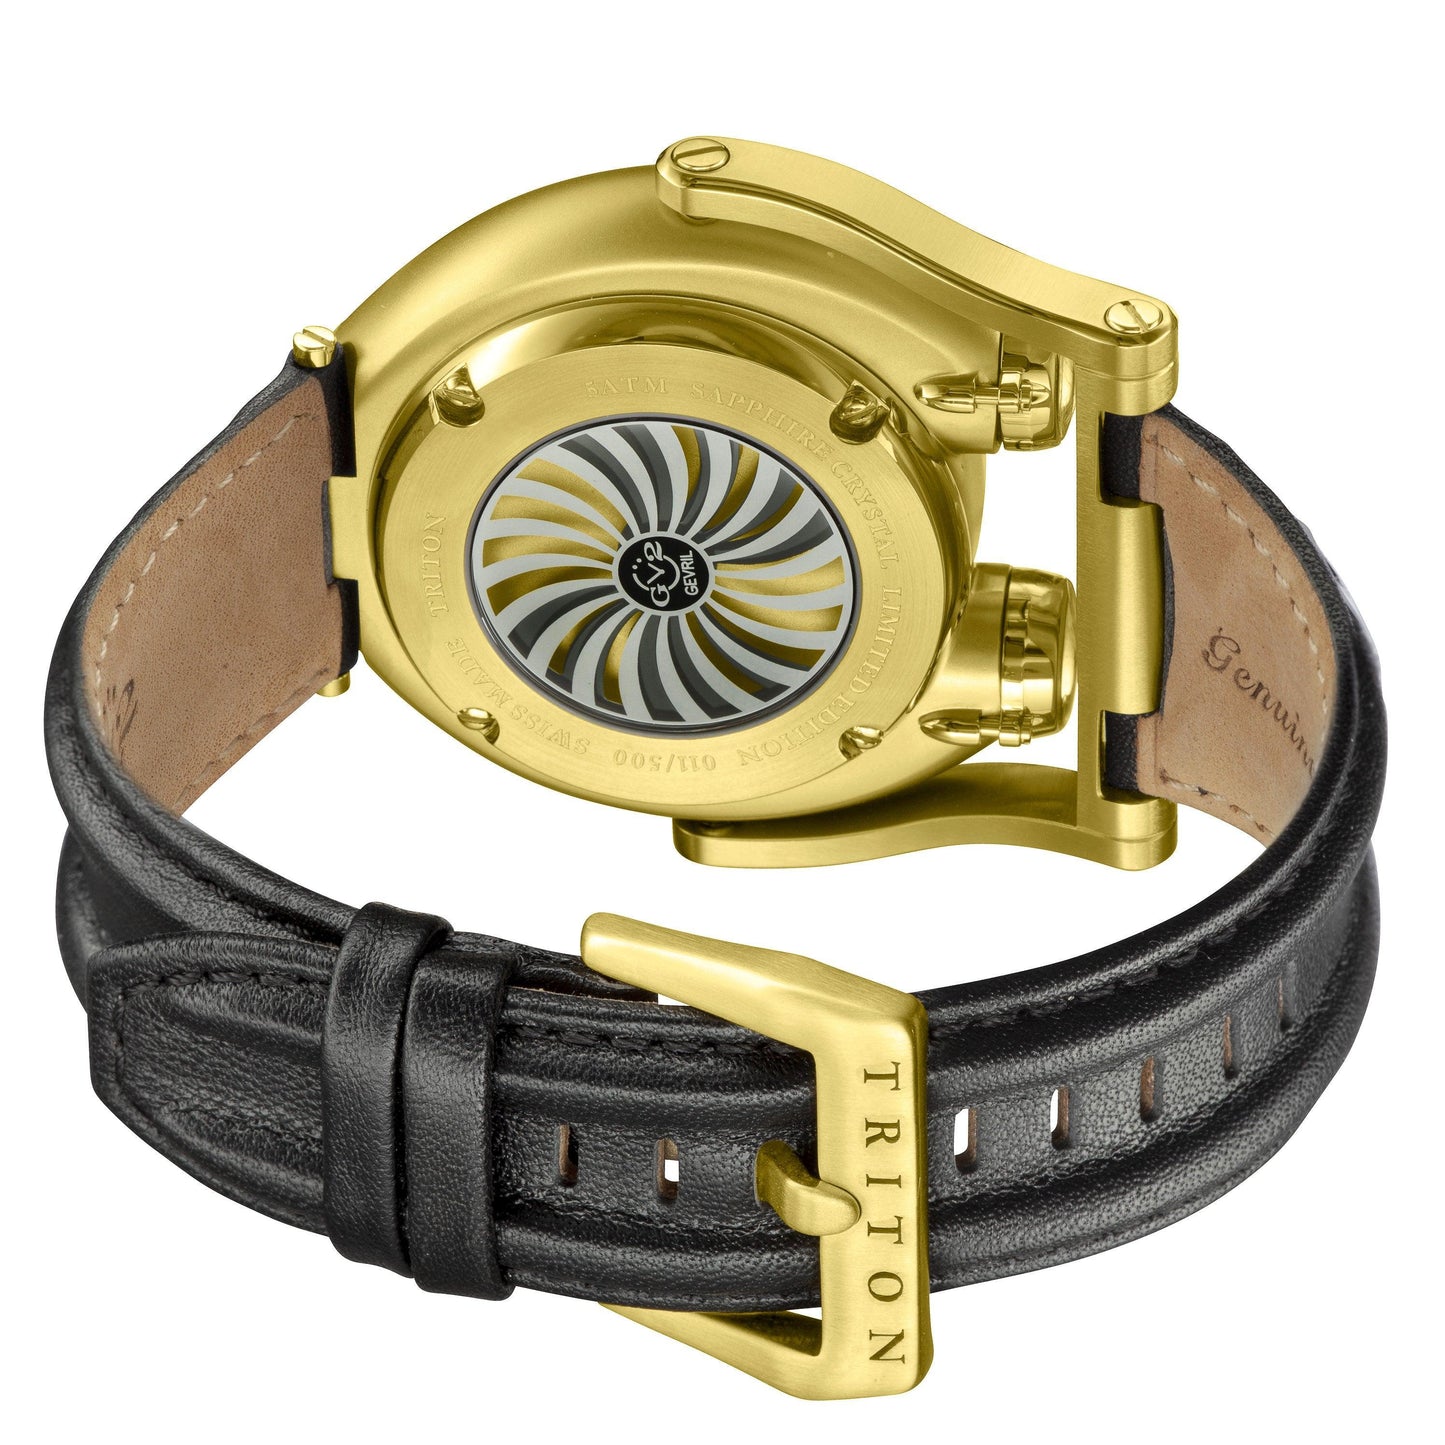 Gevril-Luxury-Swiss-Watches-GV2 Triton Automatic - Limited Edition-3408